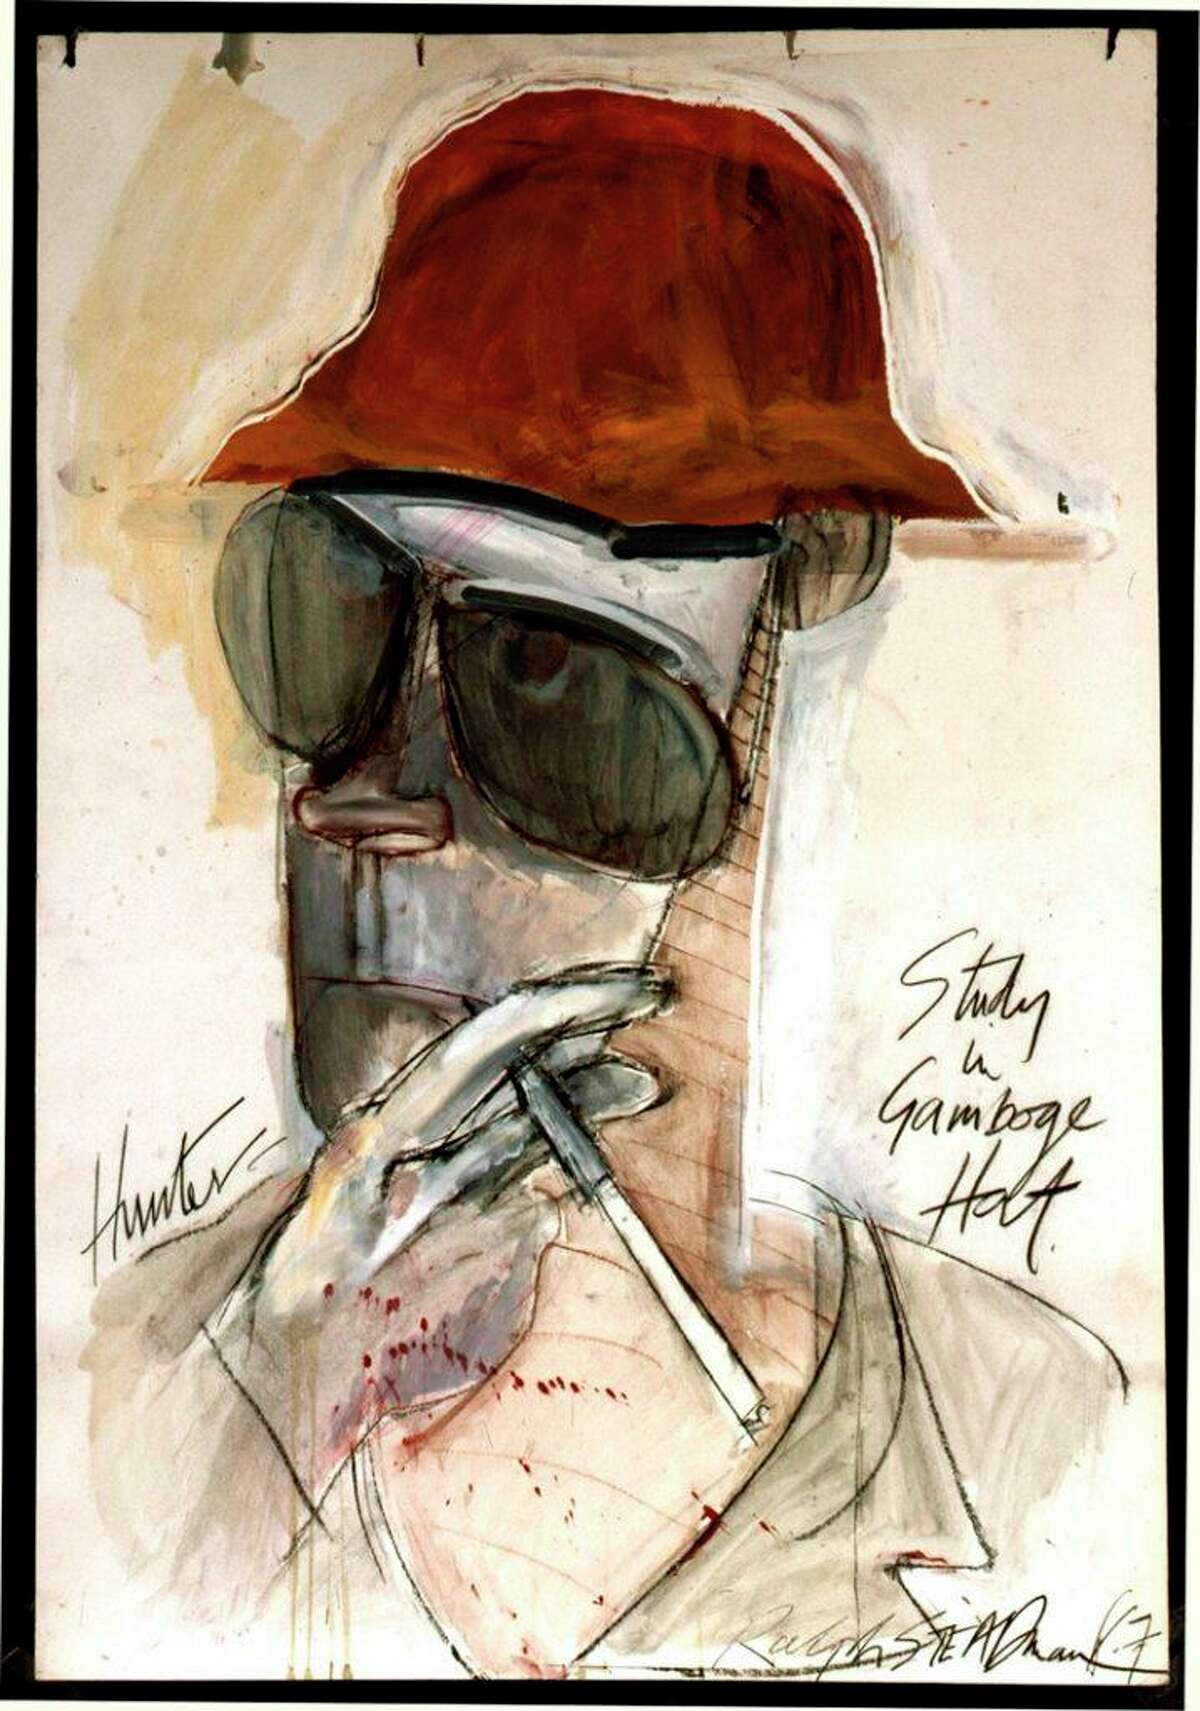 Used with permission by Ralph Steadman, courtesy of Michael Lindenberger.